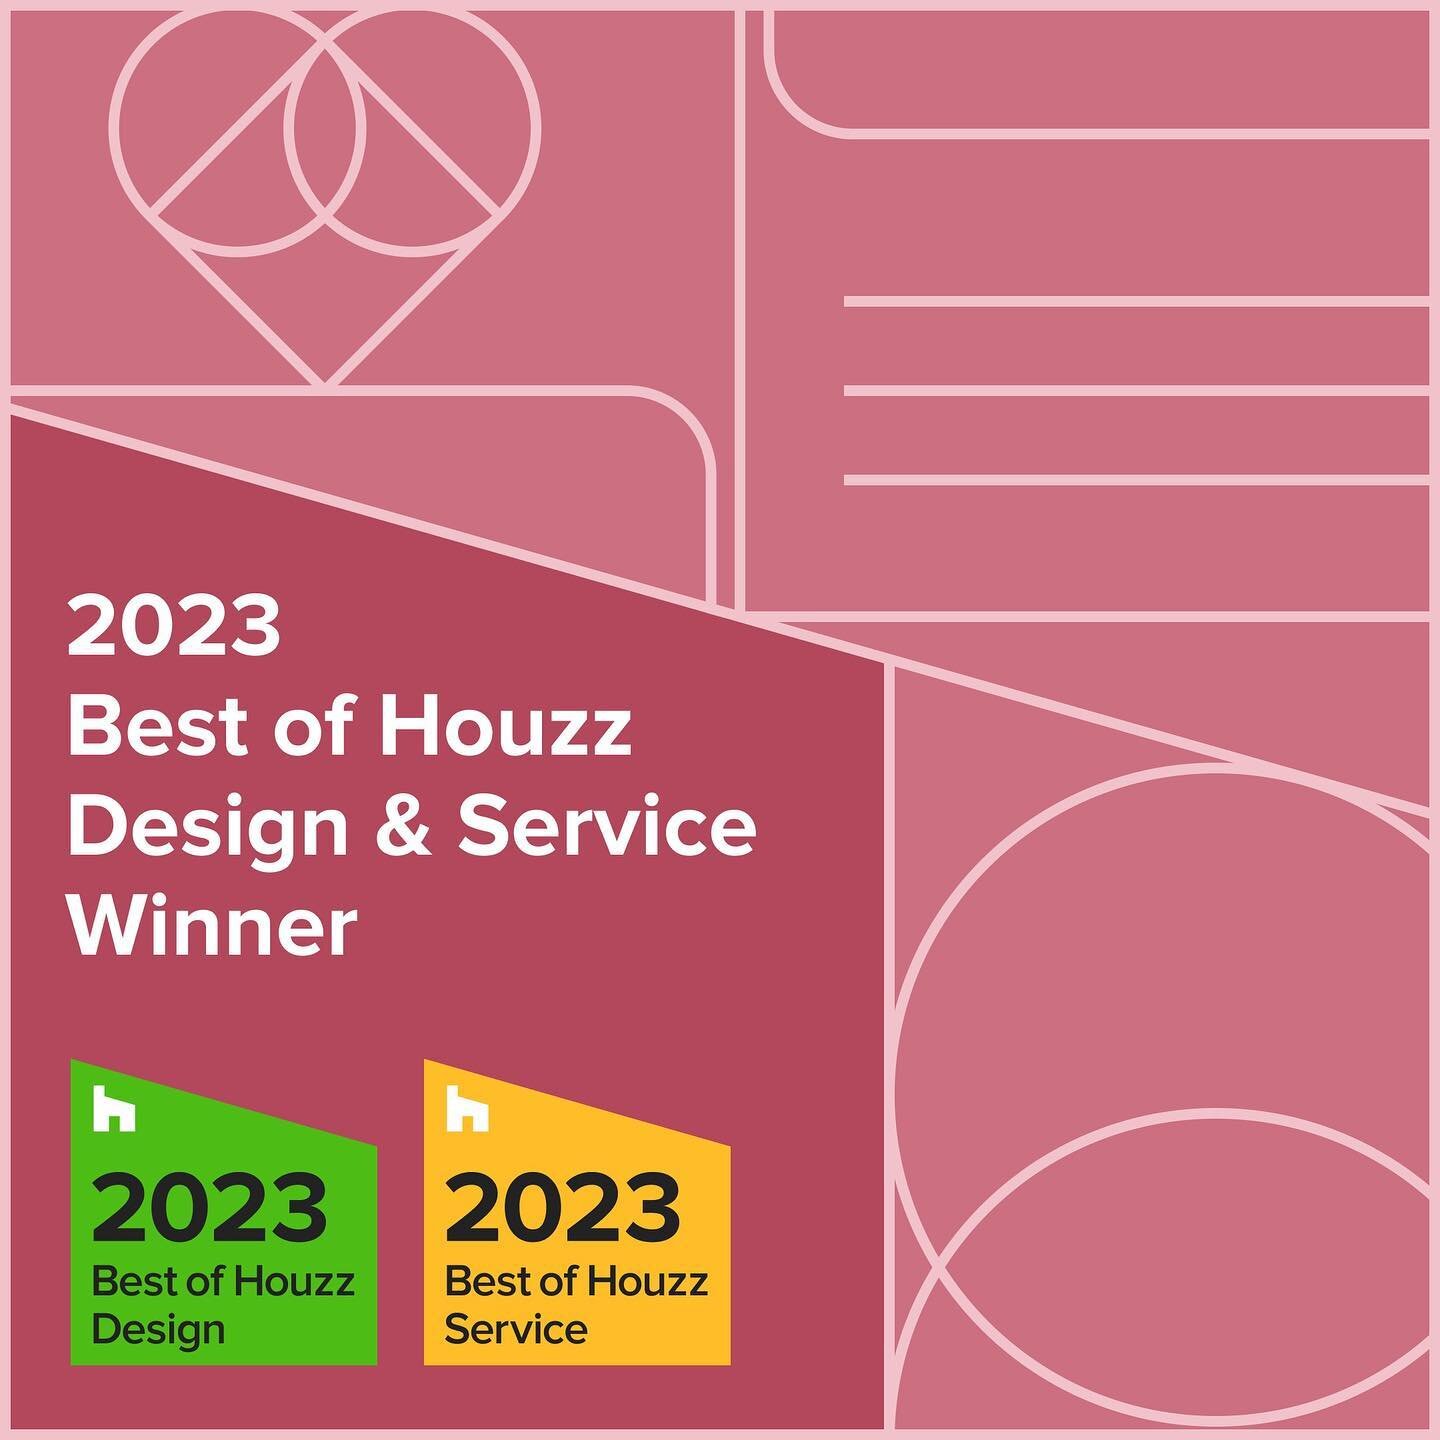 BEST OF HOUZZ AWARD! 🏆For the ninth consecutive year, KitchenVisions has been recognized with a Best of Houzz Award. This year KV won for Design and Service. Thank you @houzz and to our loyal clients who place their trust in our design vision.

#awa